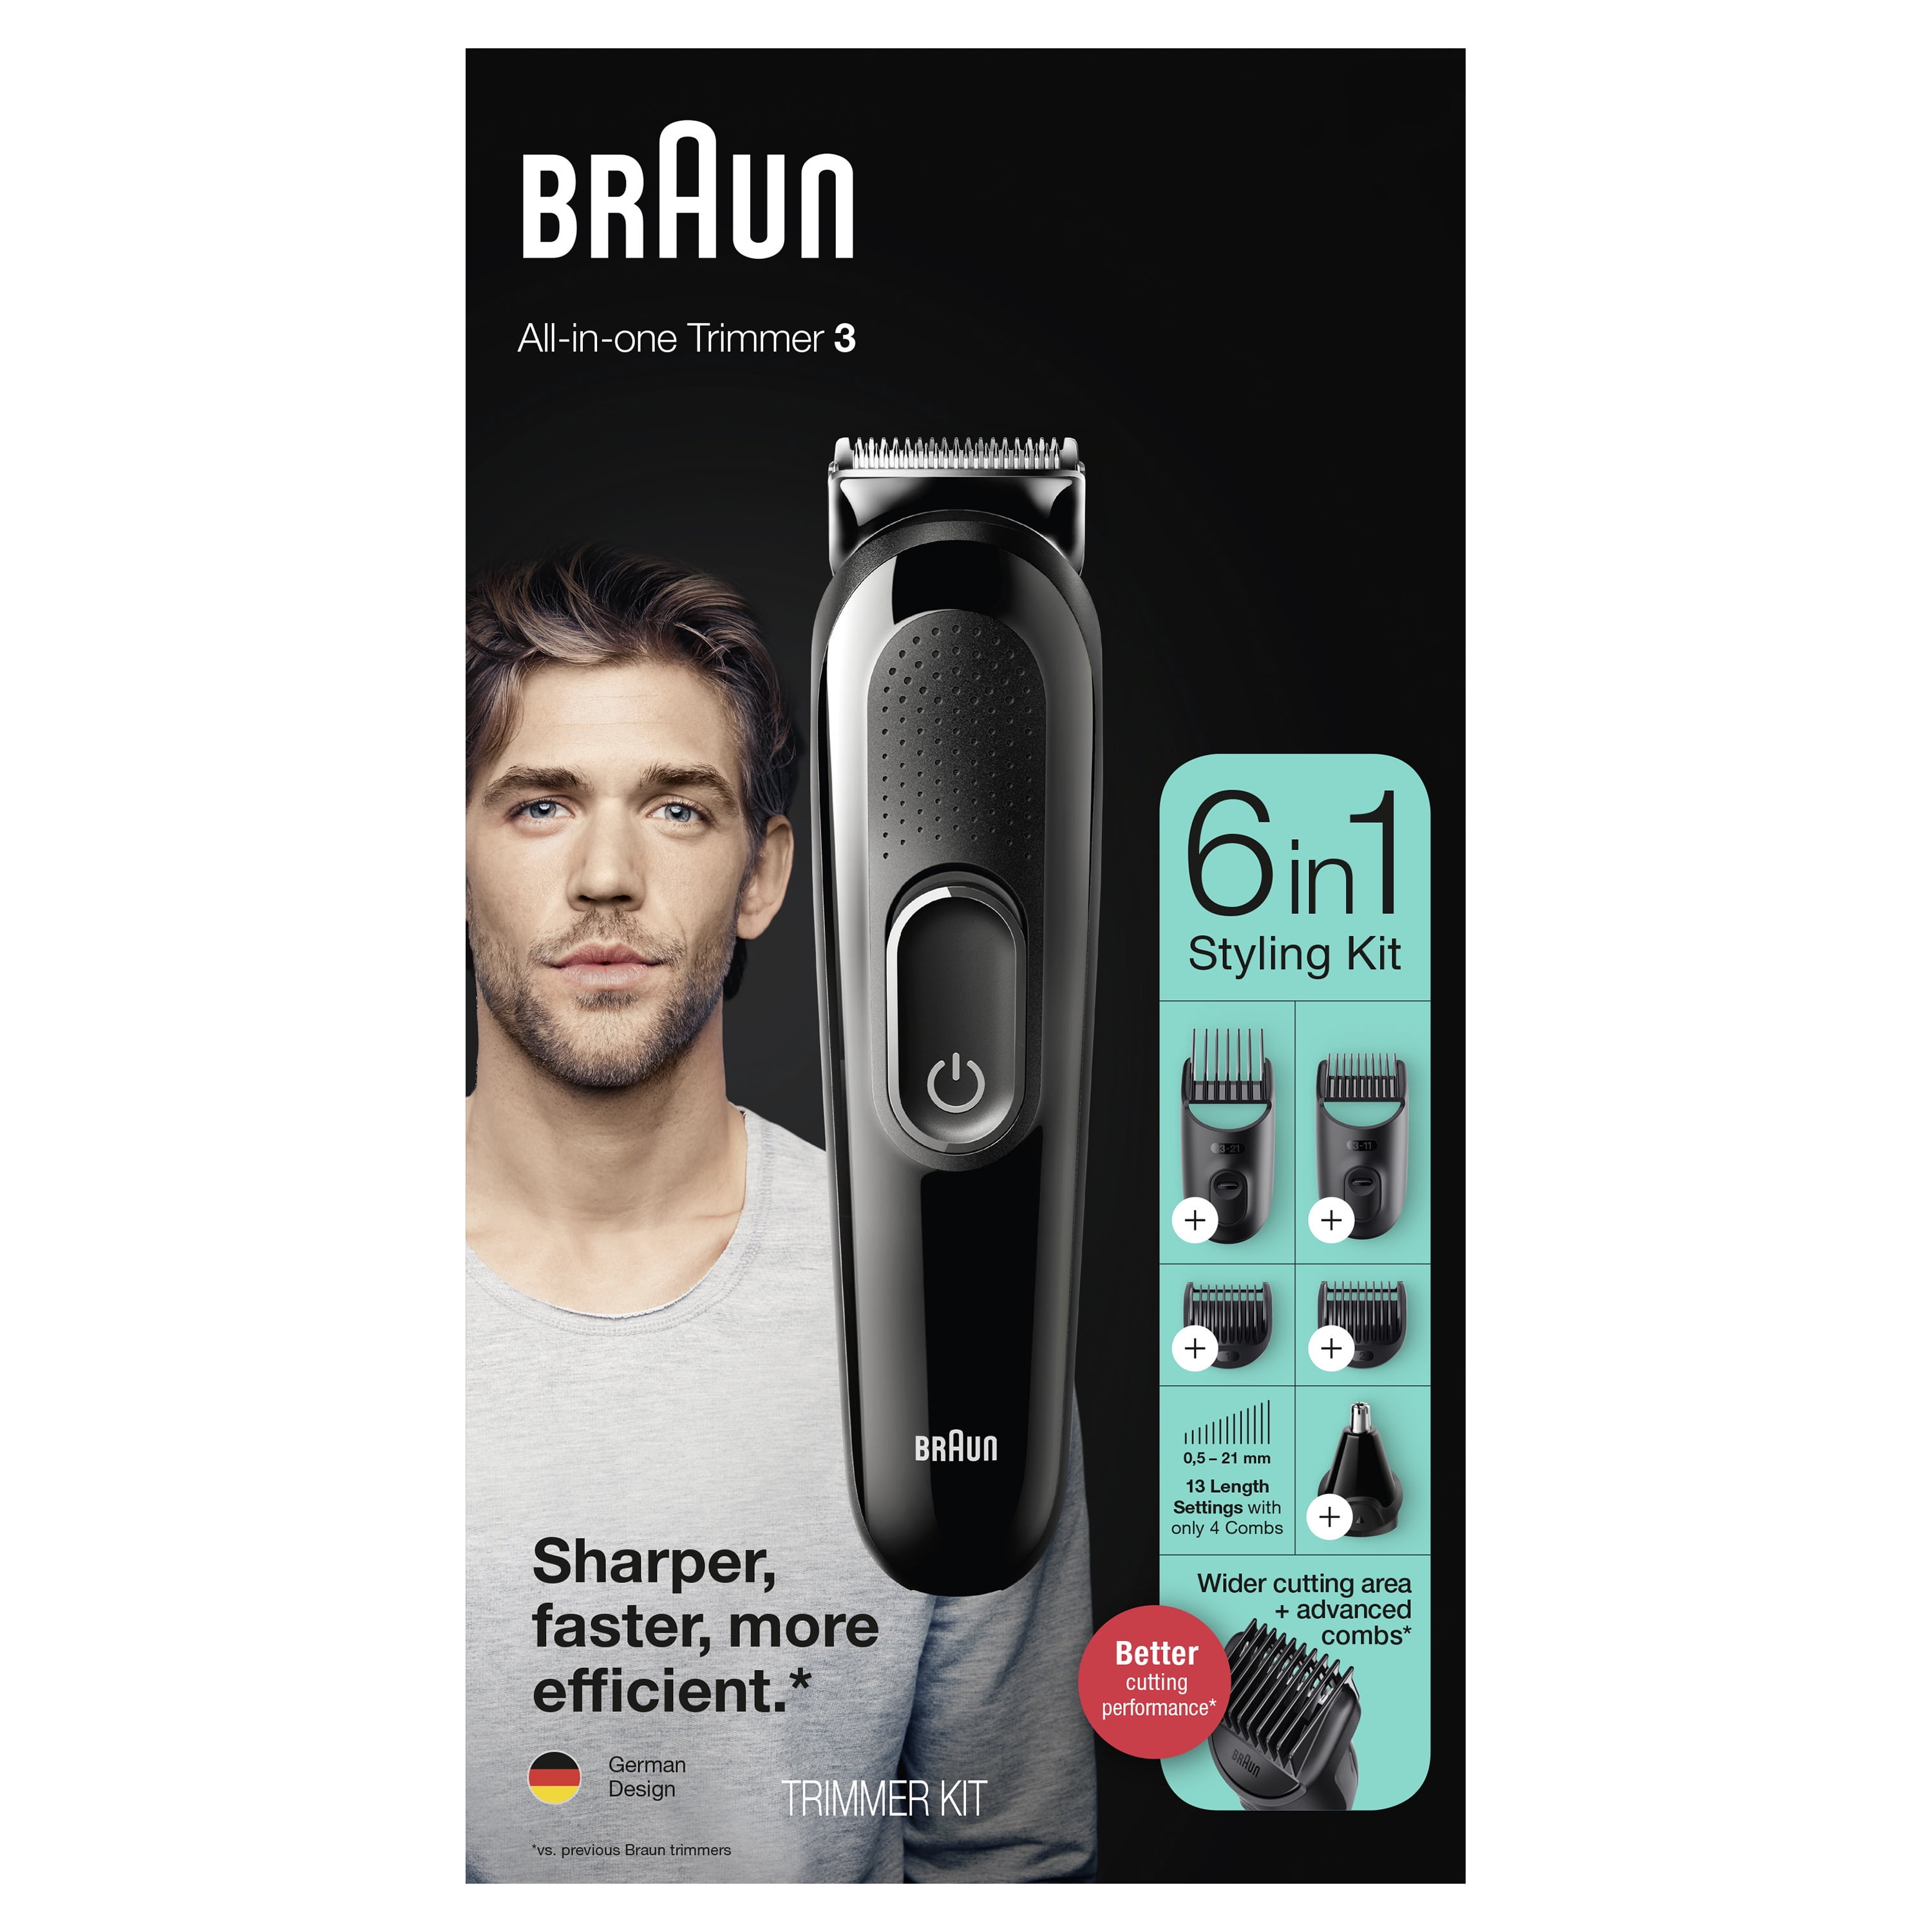 Braun MGK3220, 6-in-1 Electric Beard Trimmer for Men, All-in-One Grooming Kit, - Walmart.com